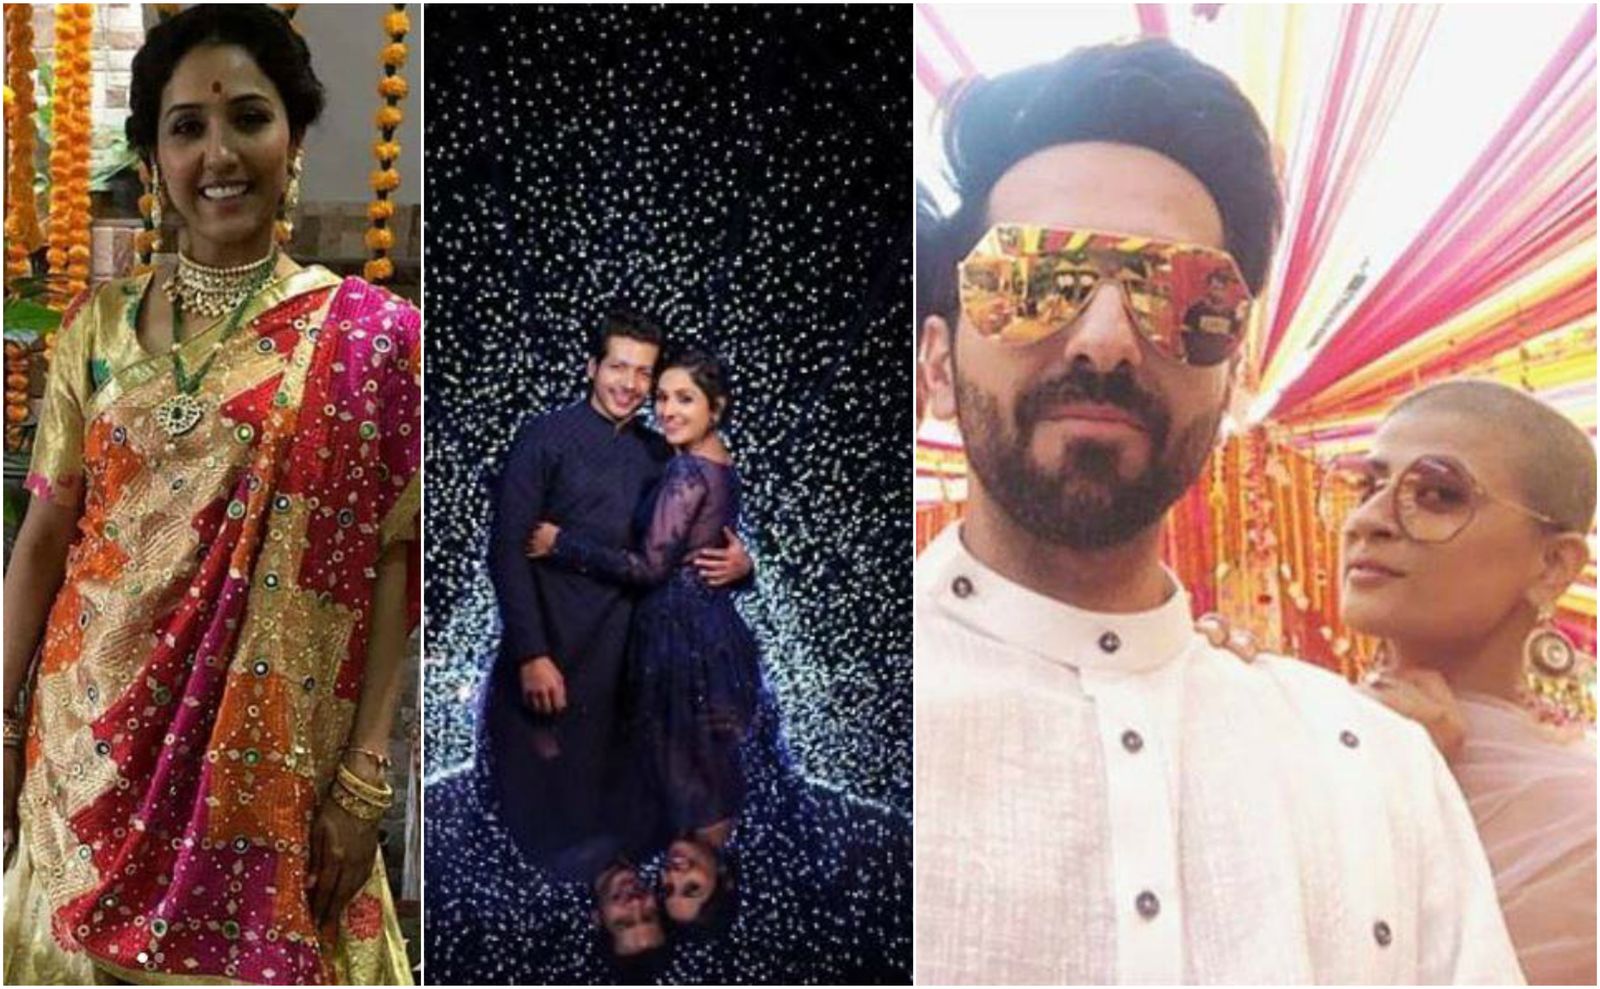 Neeti Mohan And Nihar Pandya's Wedding Ceremony Is All Friends, Family And Fun